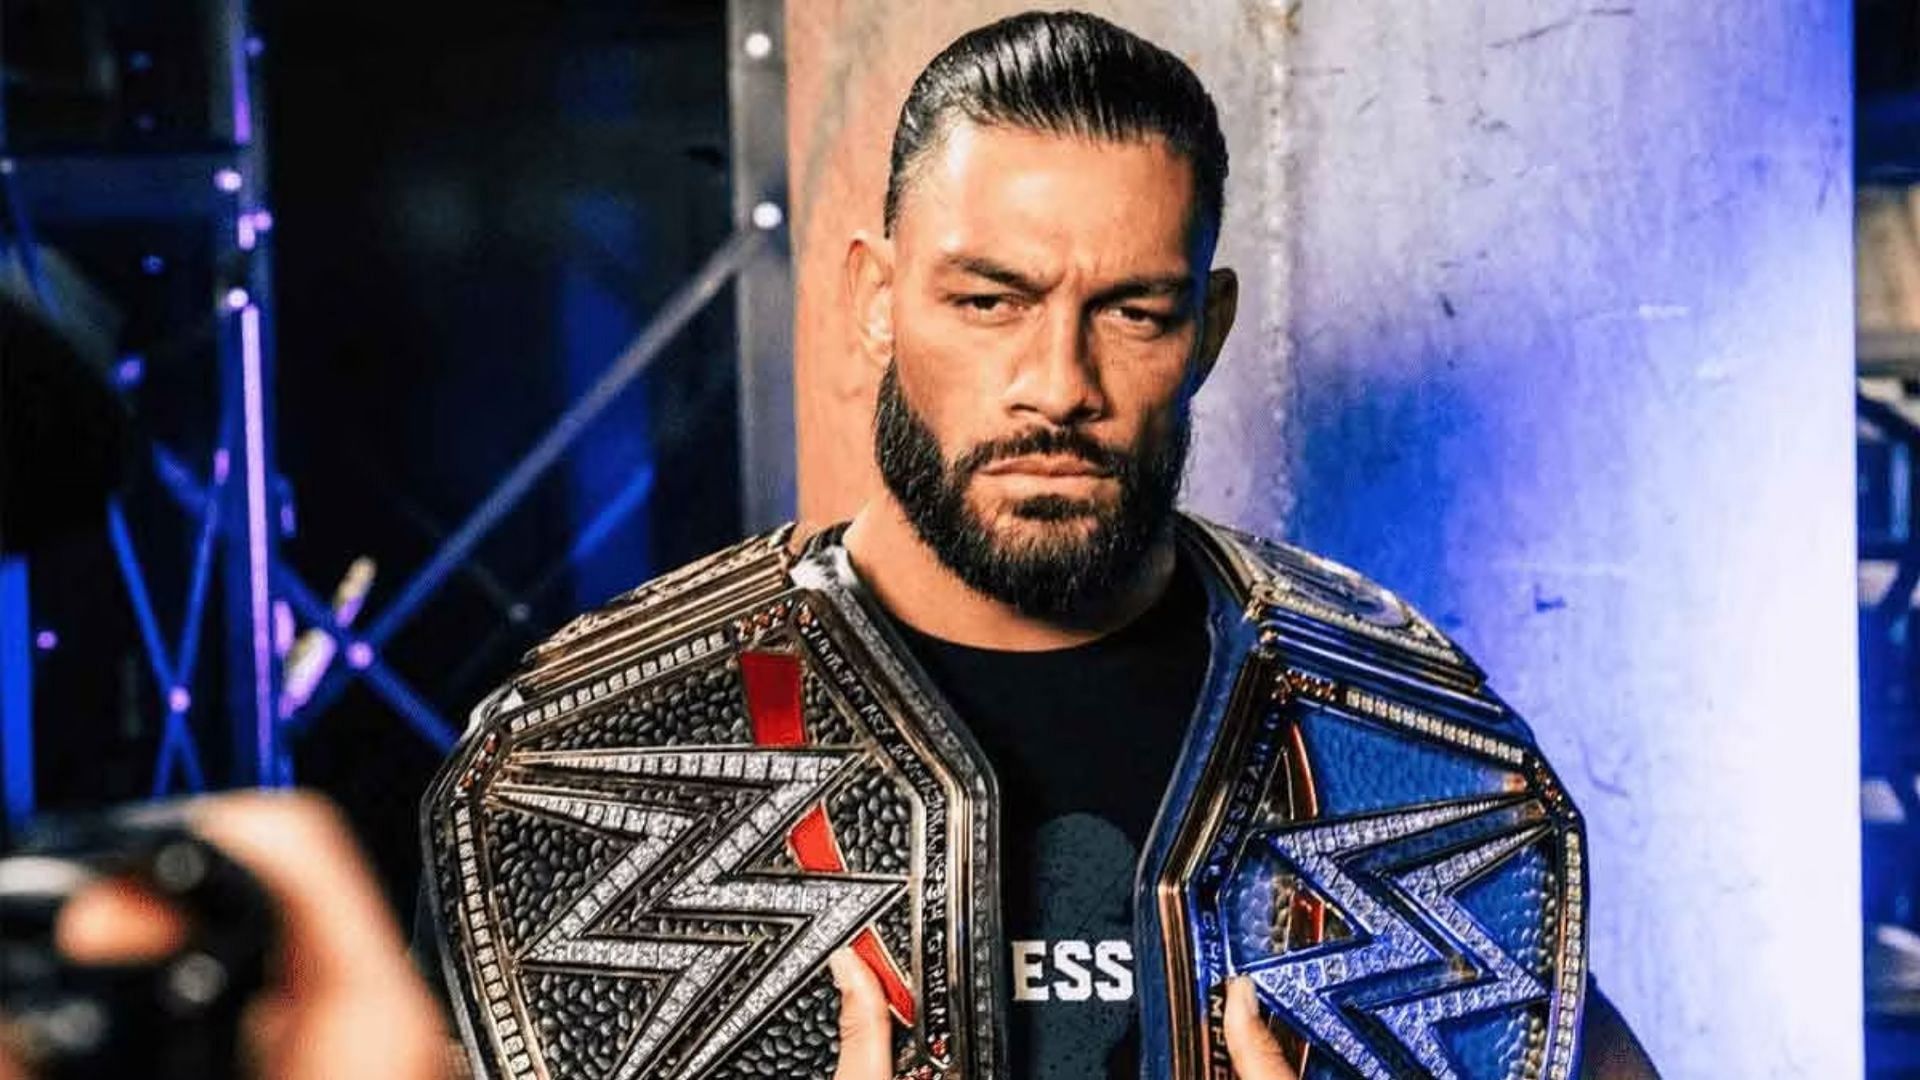 Roman Reigns is the current Undisputed WWE Universal Champion.